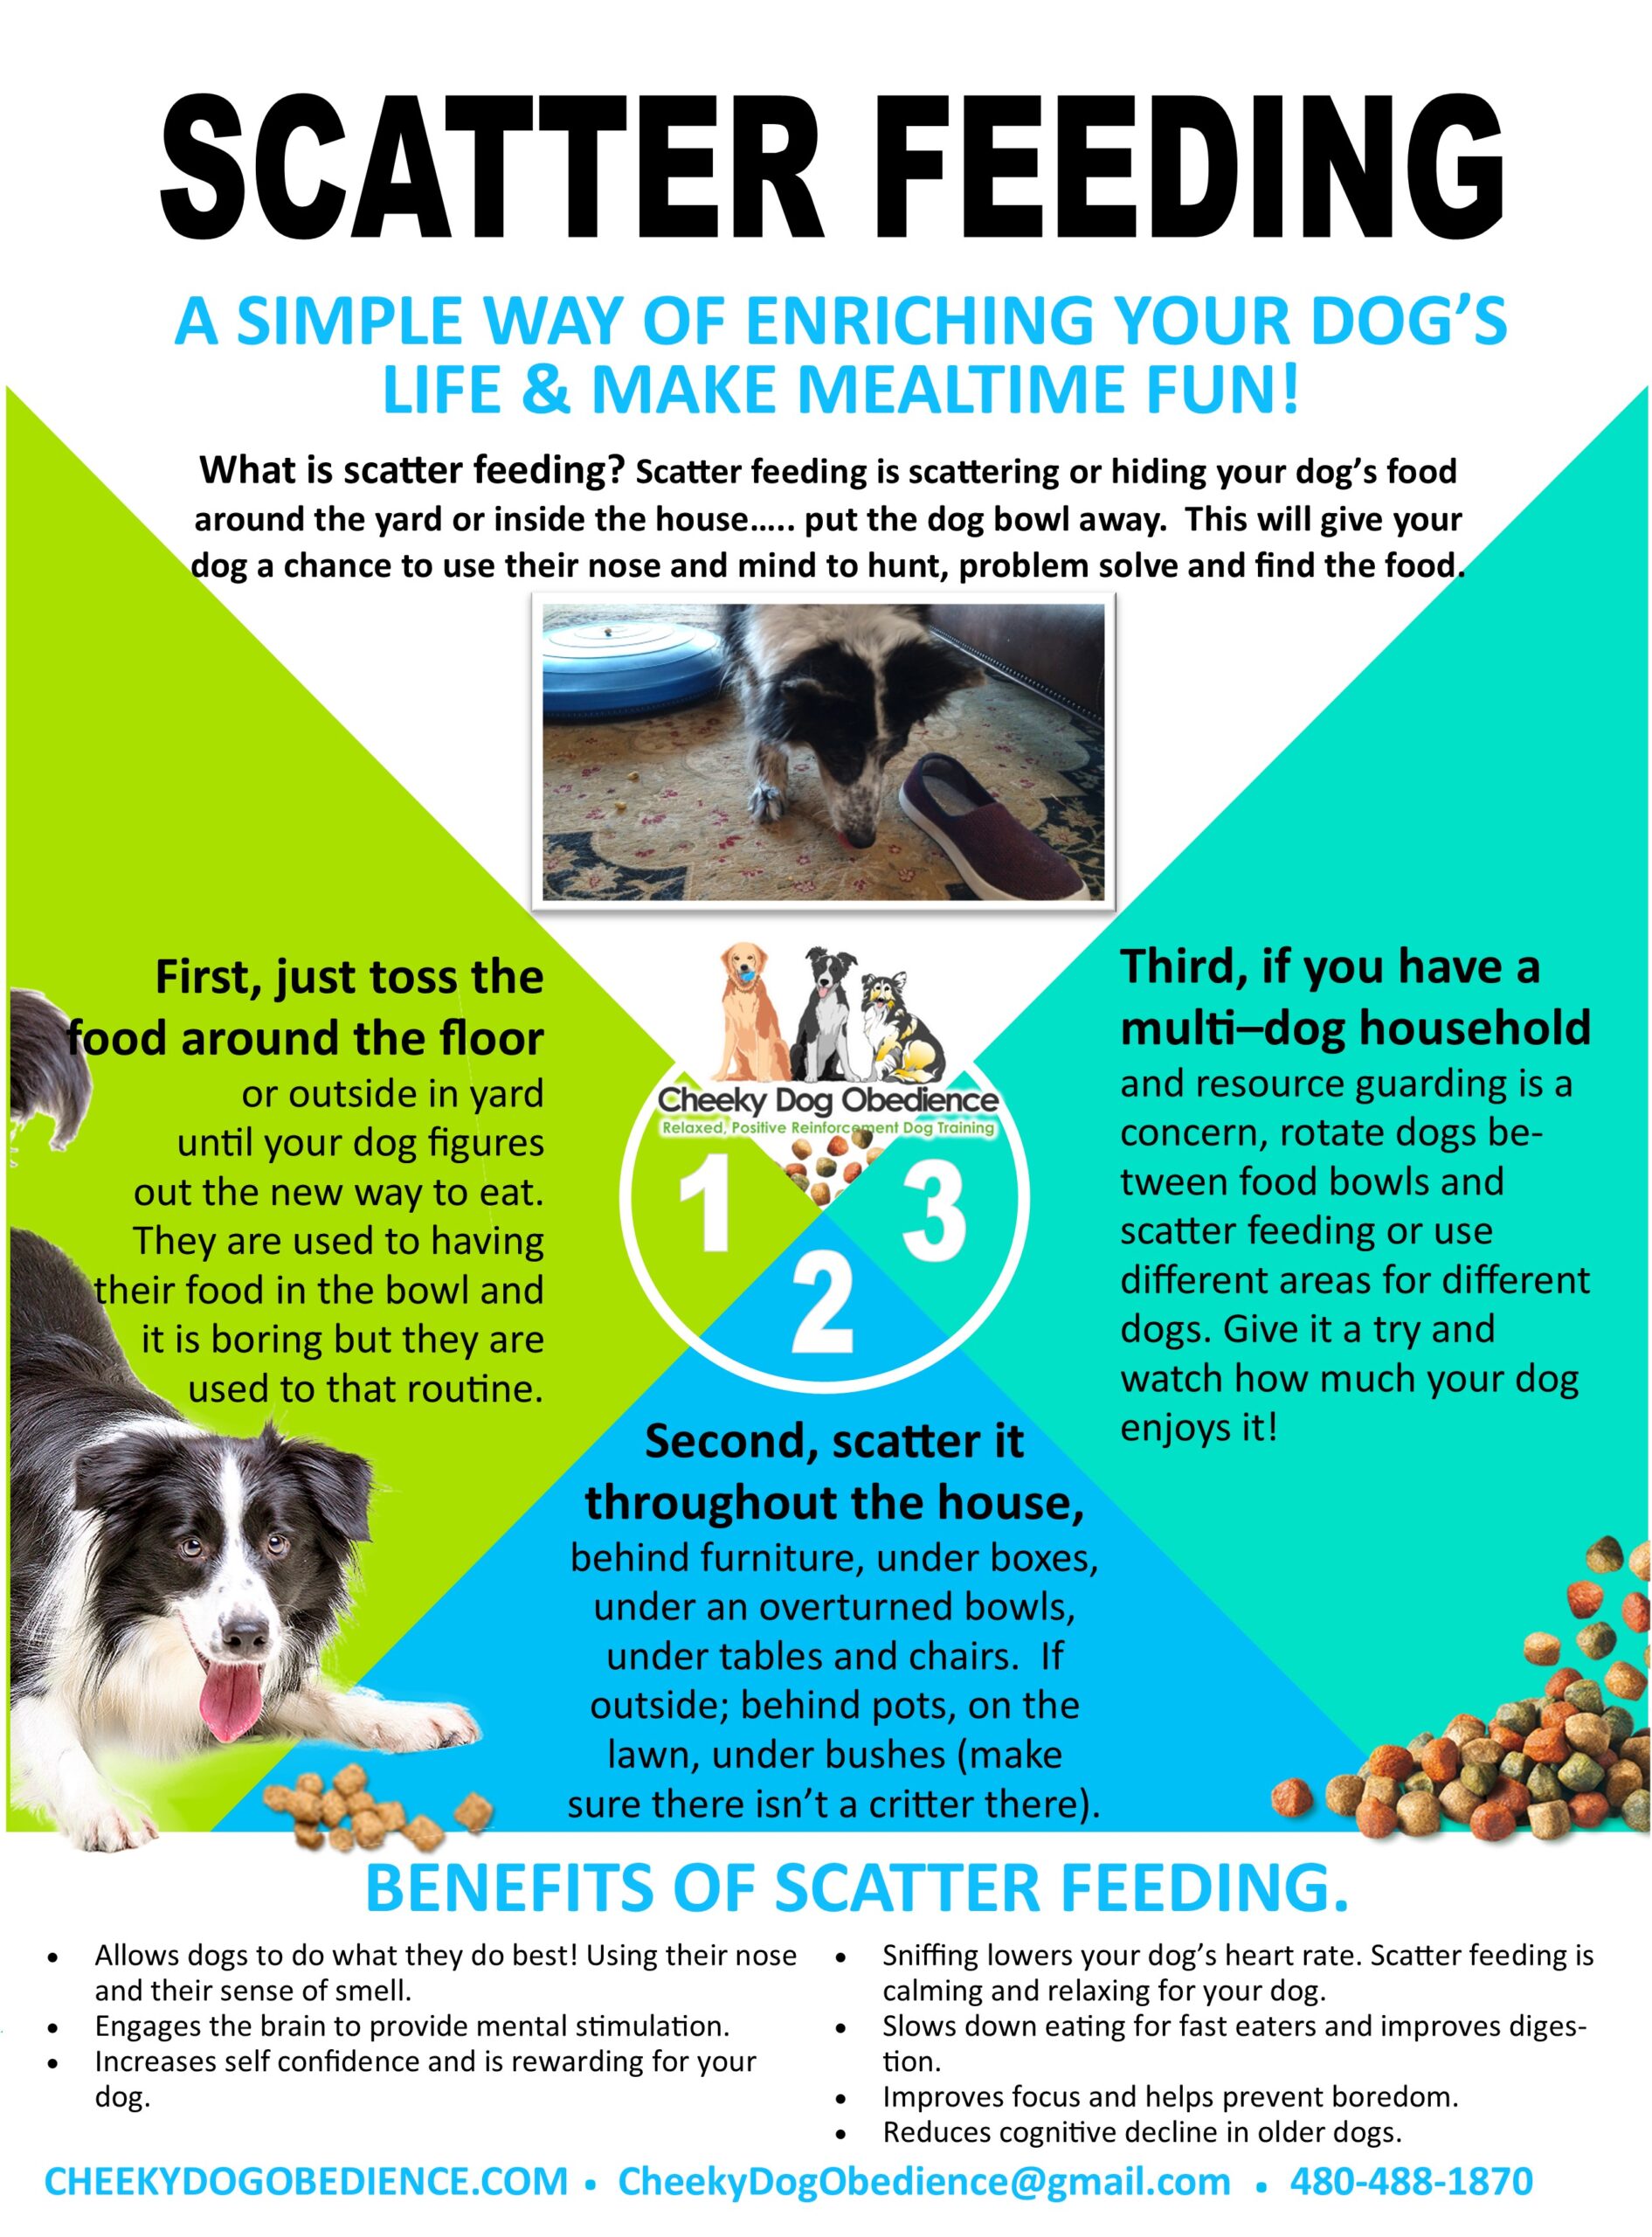 Indoor Summer Fun for your dog